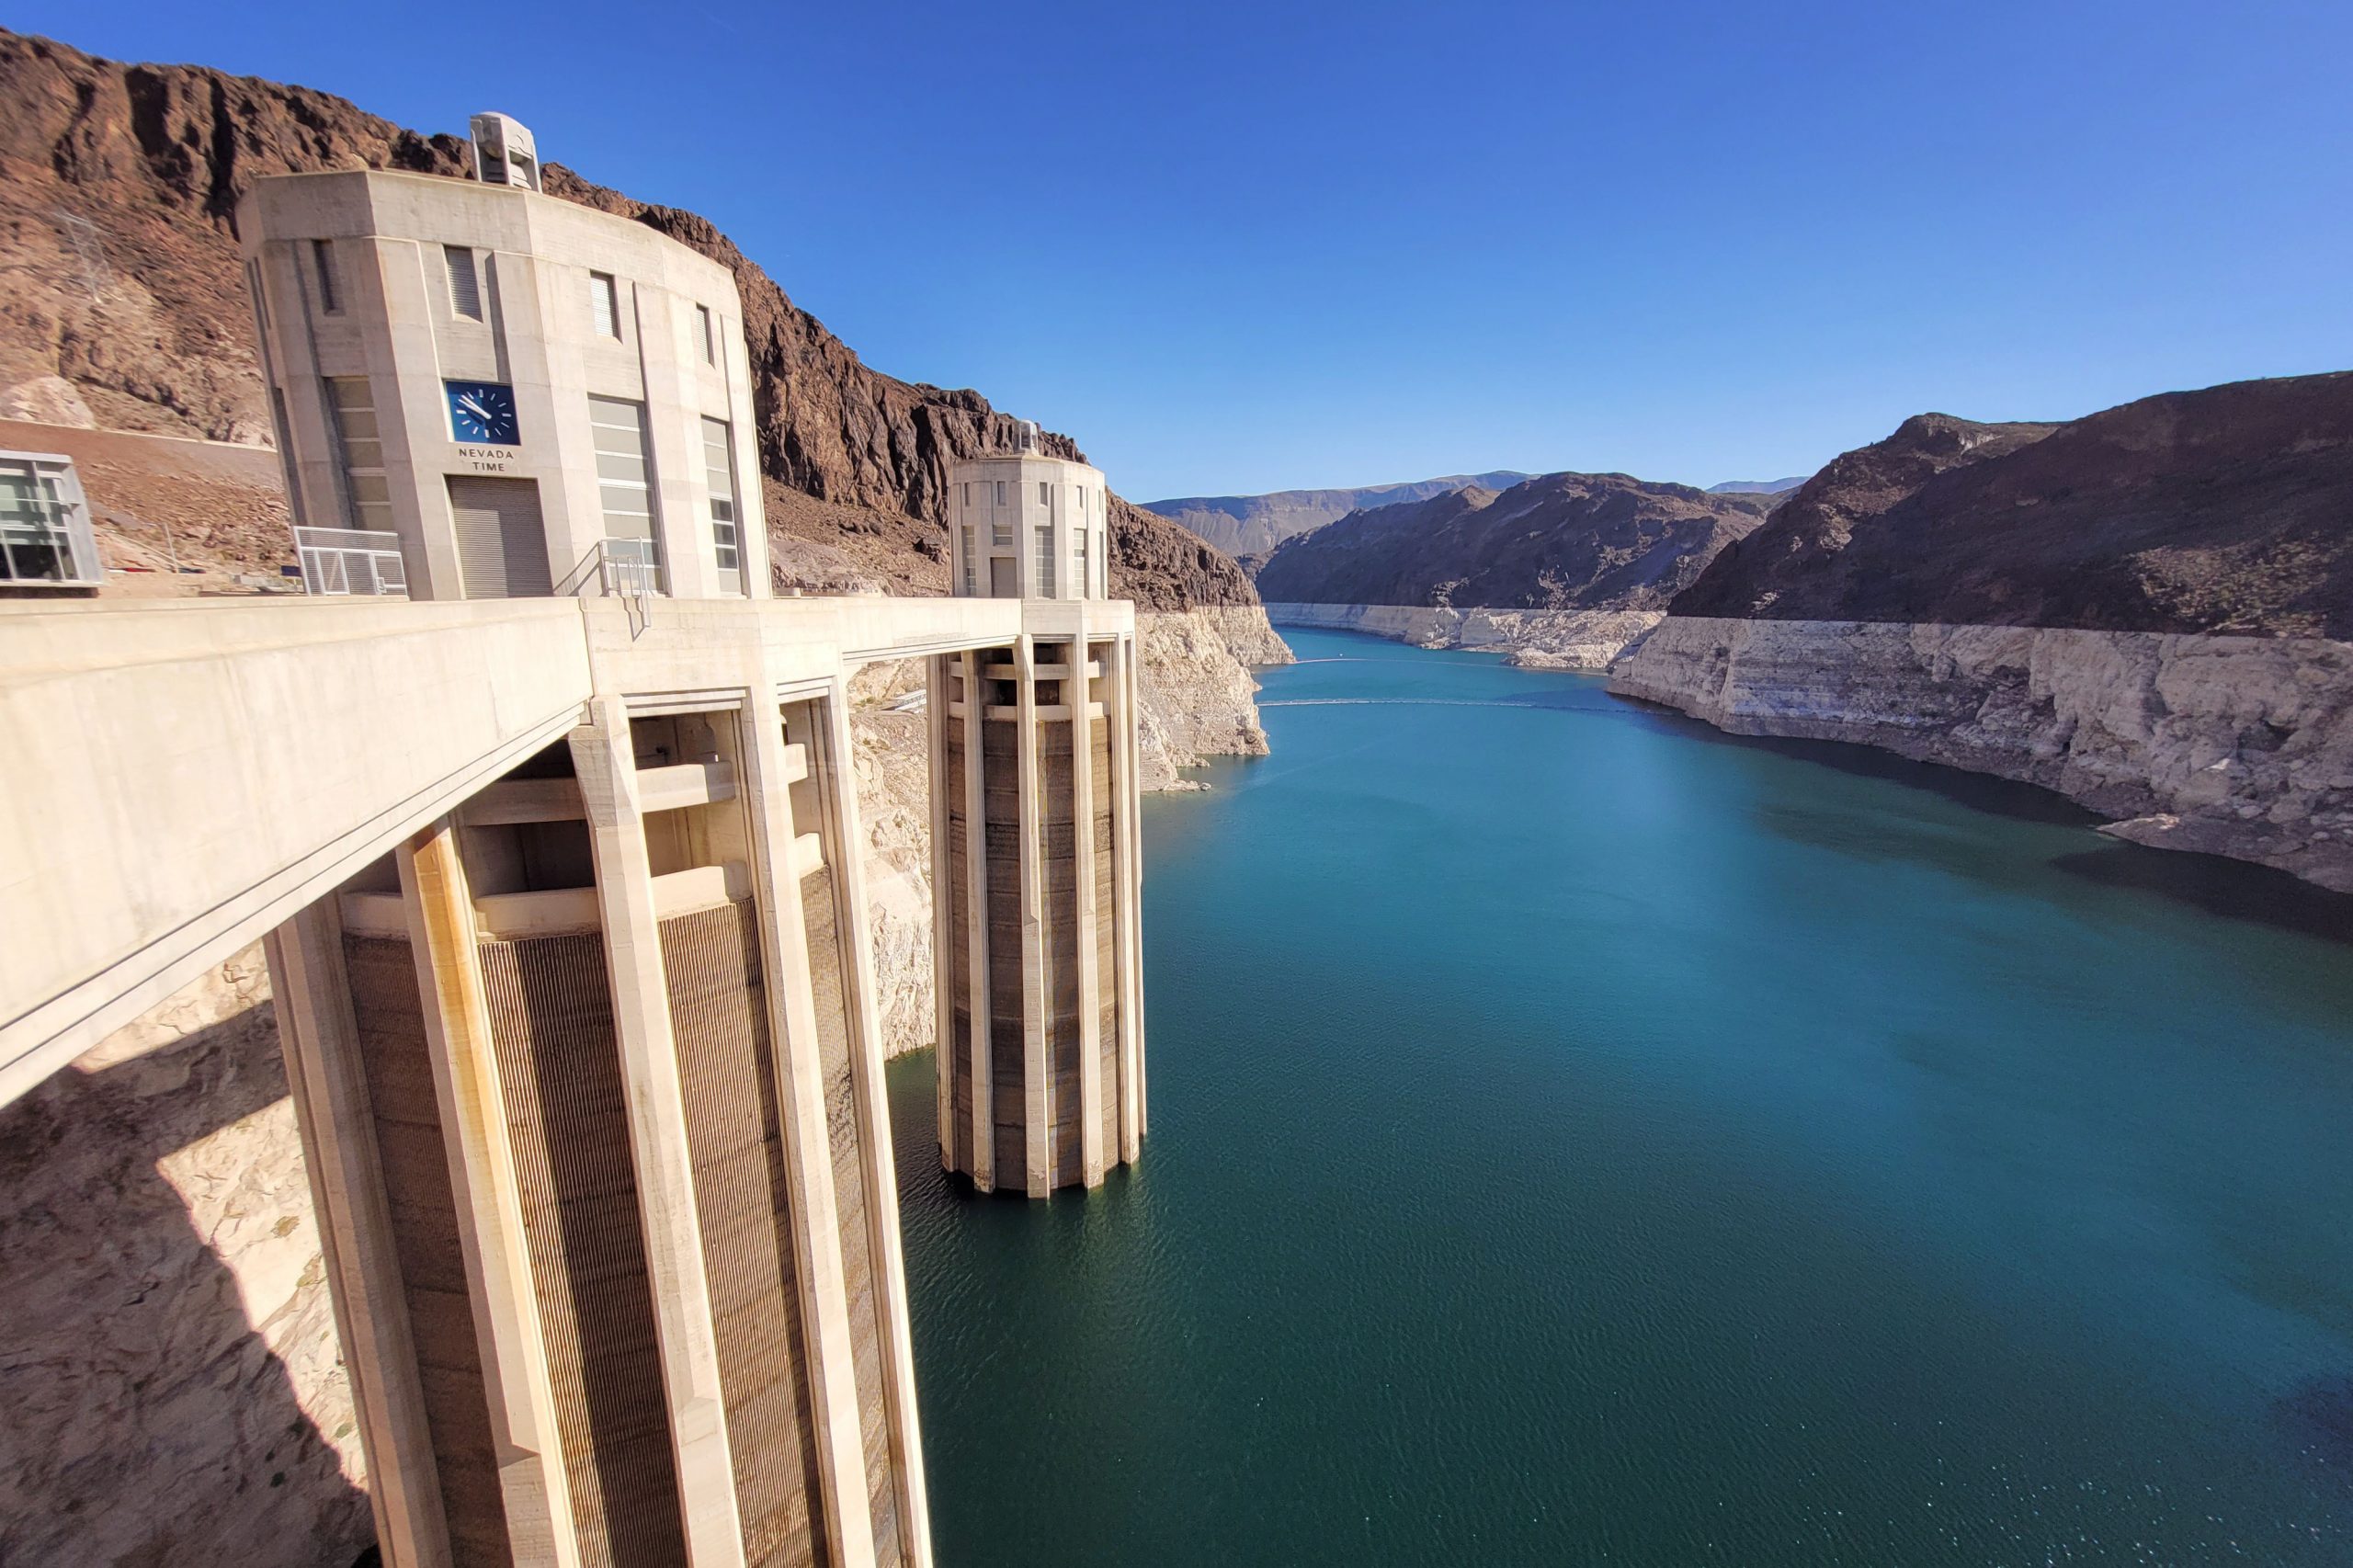 California Water Agencies Submit Colorado River Modeling Framework to Bureau of Reclamation